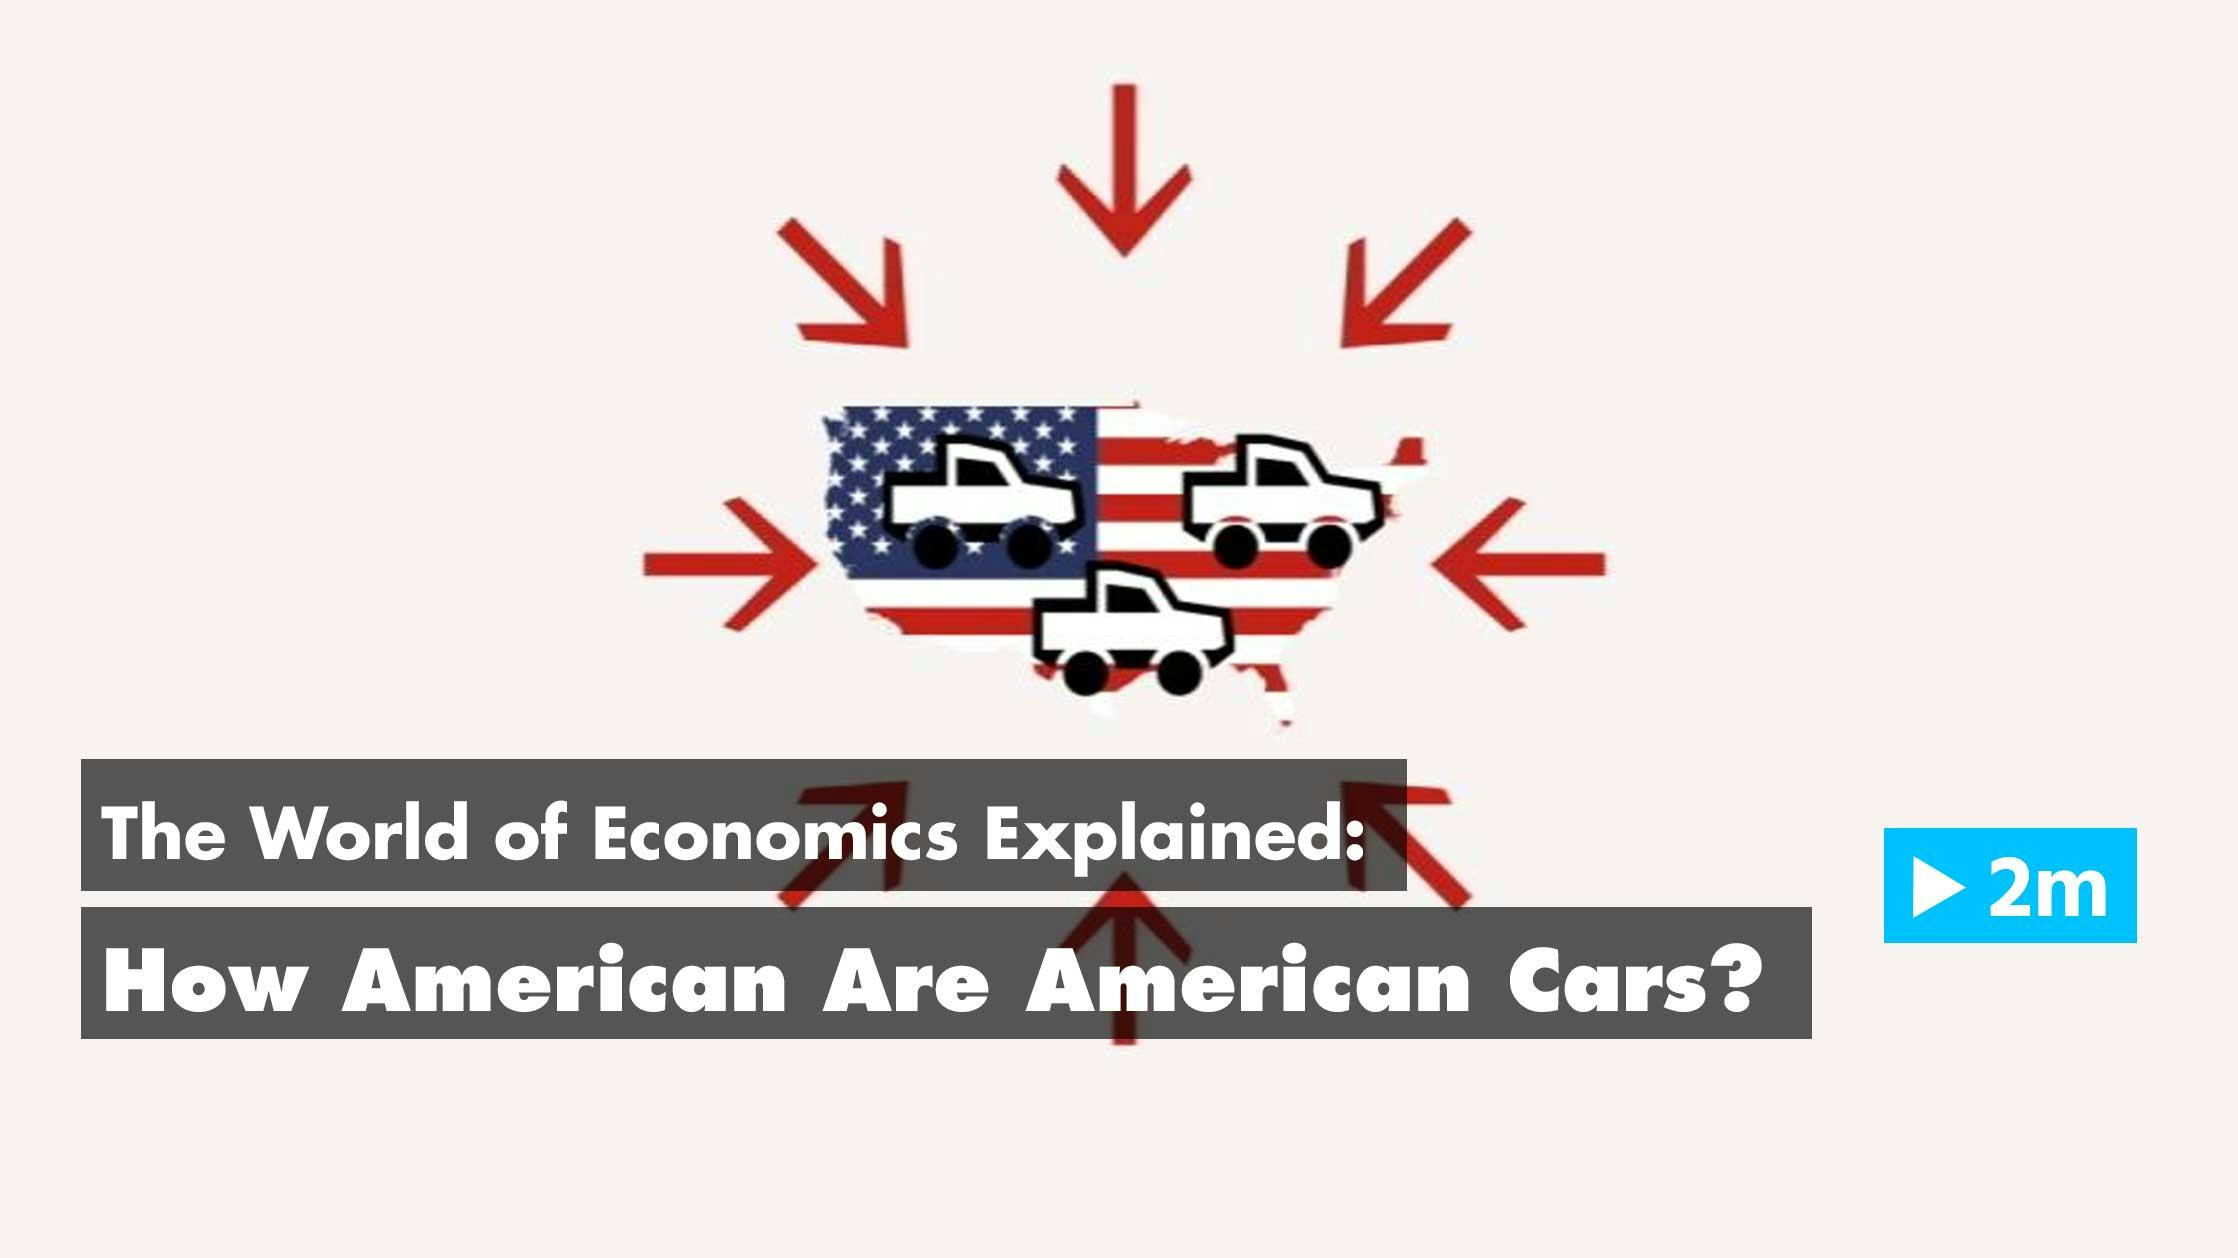 The World of Economics Explained: How American are American Cars?